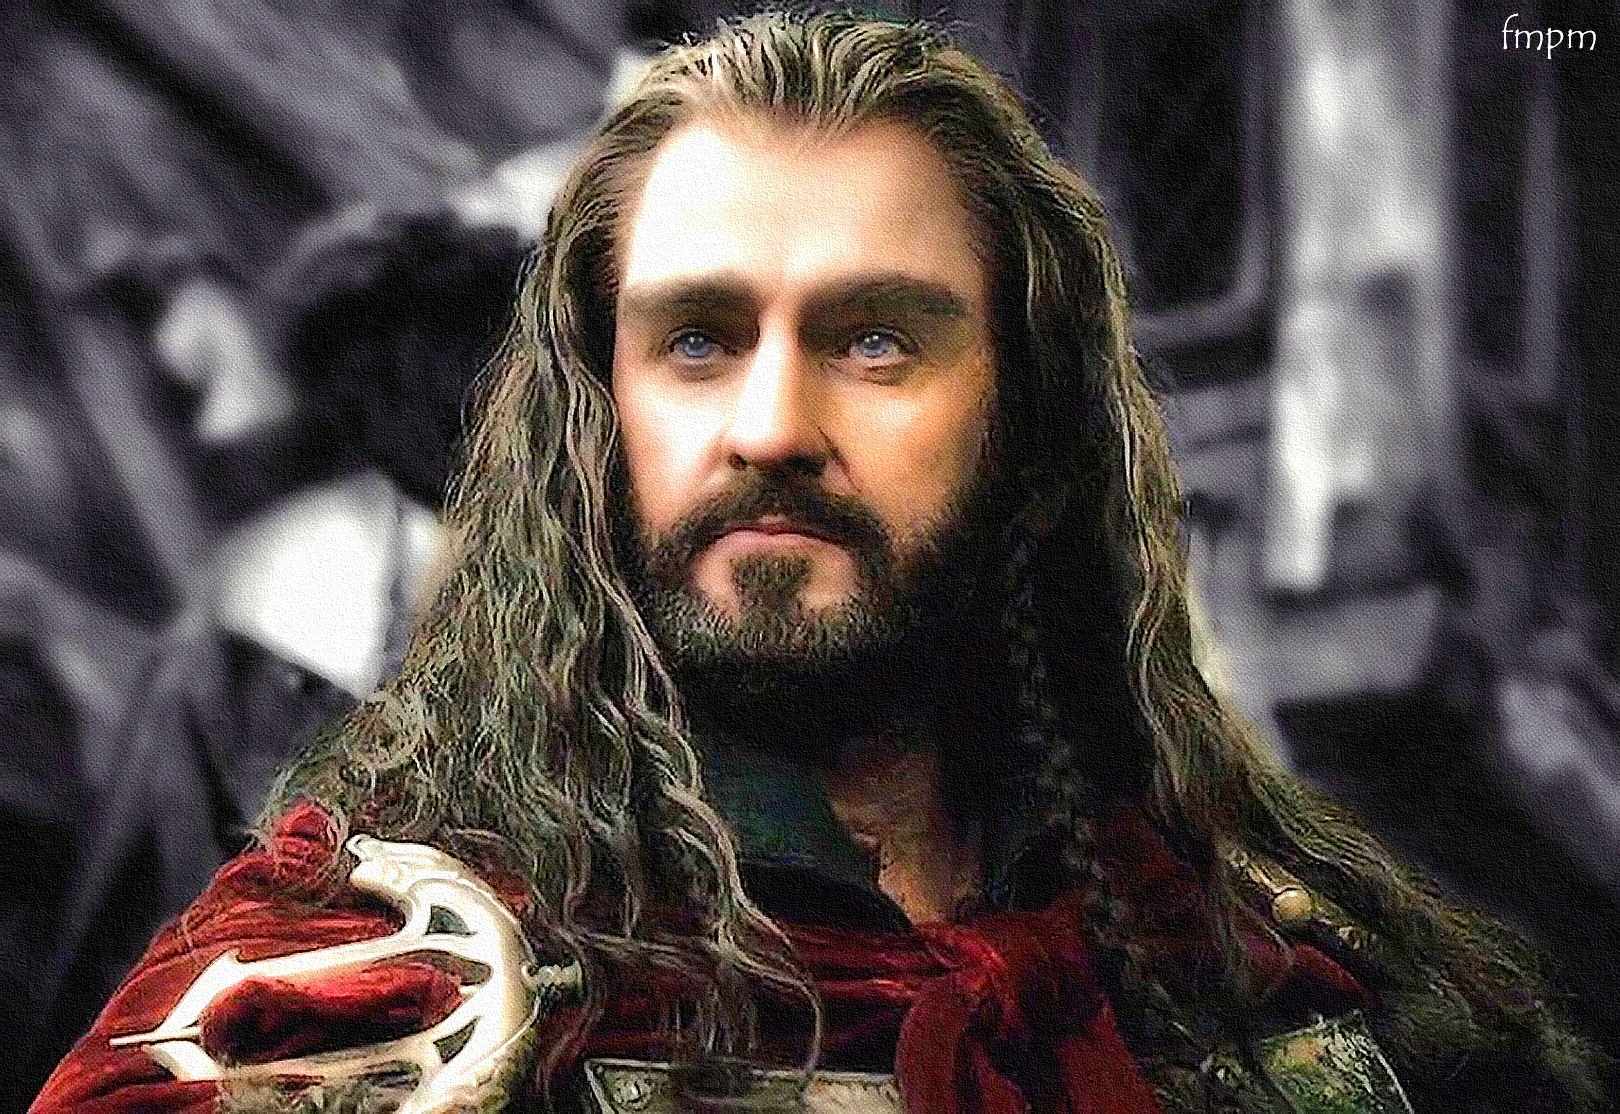 Thorin's Right by fmpm on DeviantArt